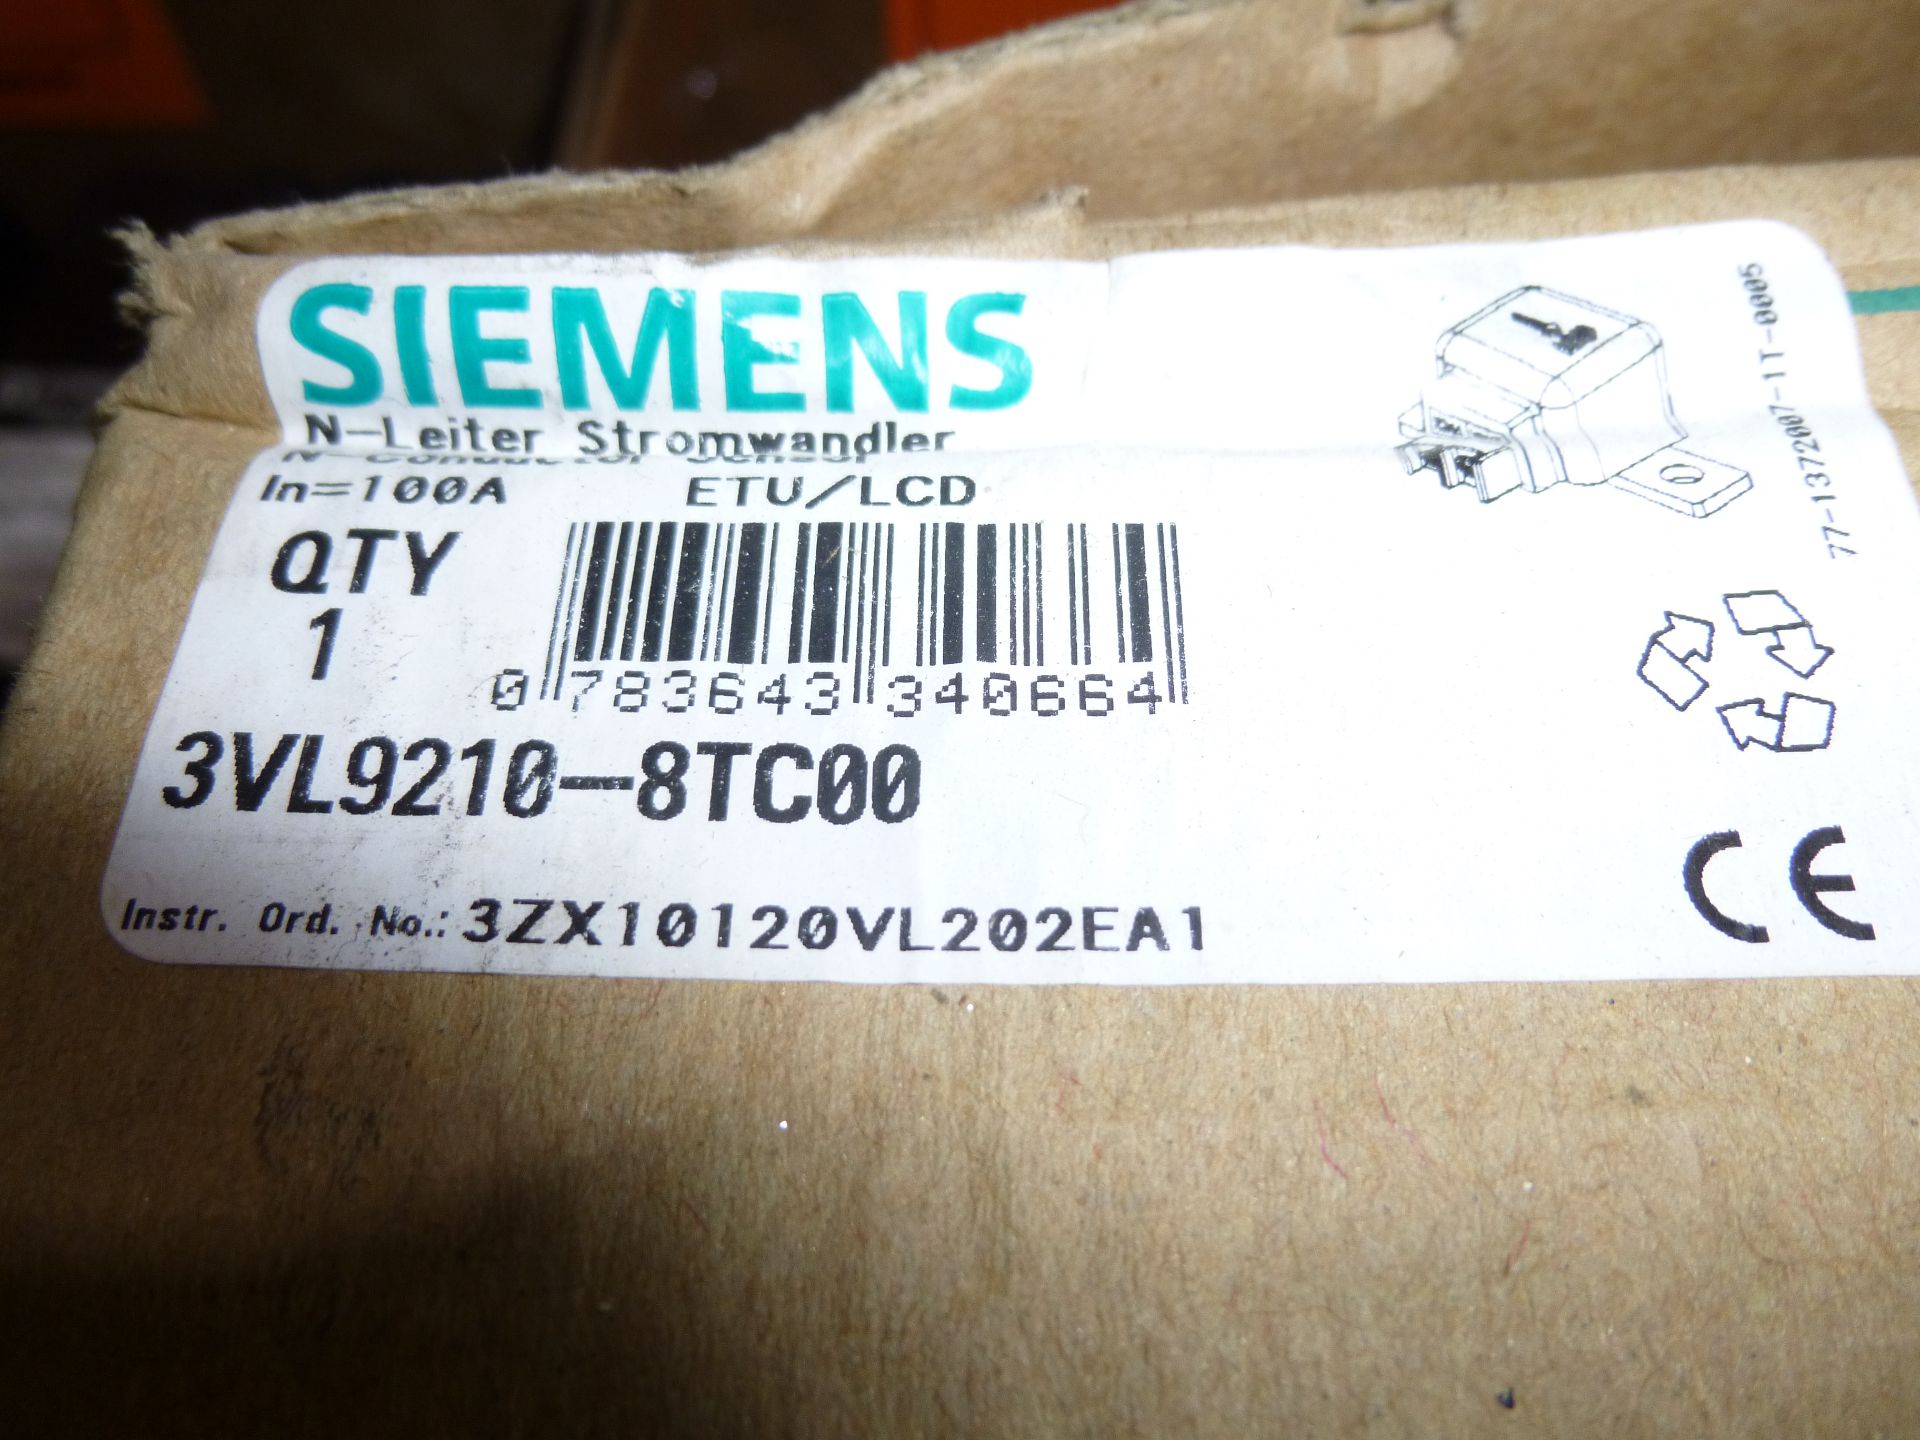 Siemens model 3VL9210-8TC00, new in box, as always with Brolyn LLC auctions, all lots can be - Image 2 of 2